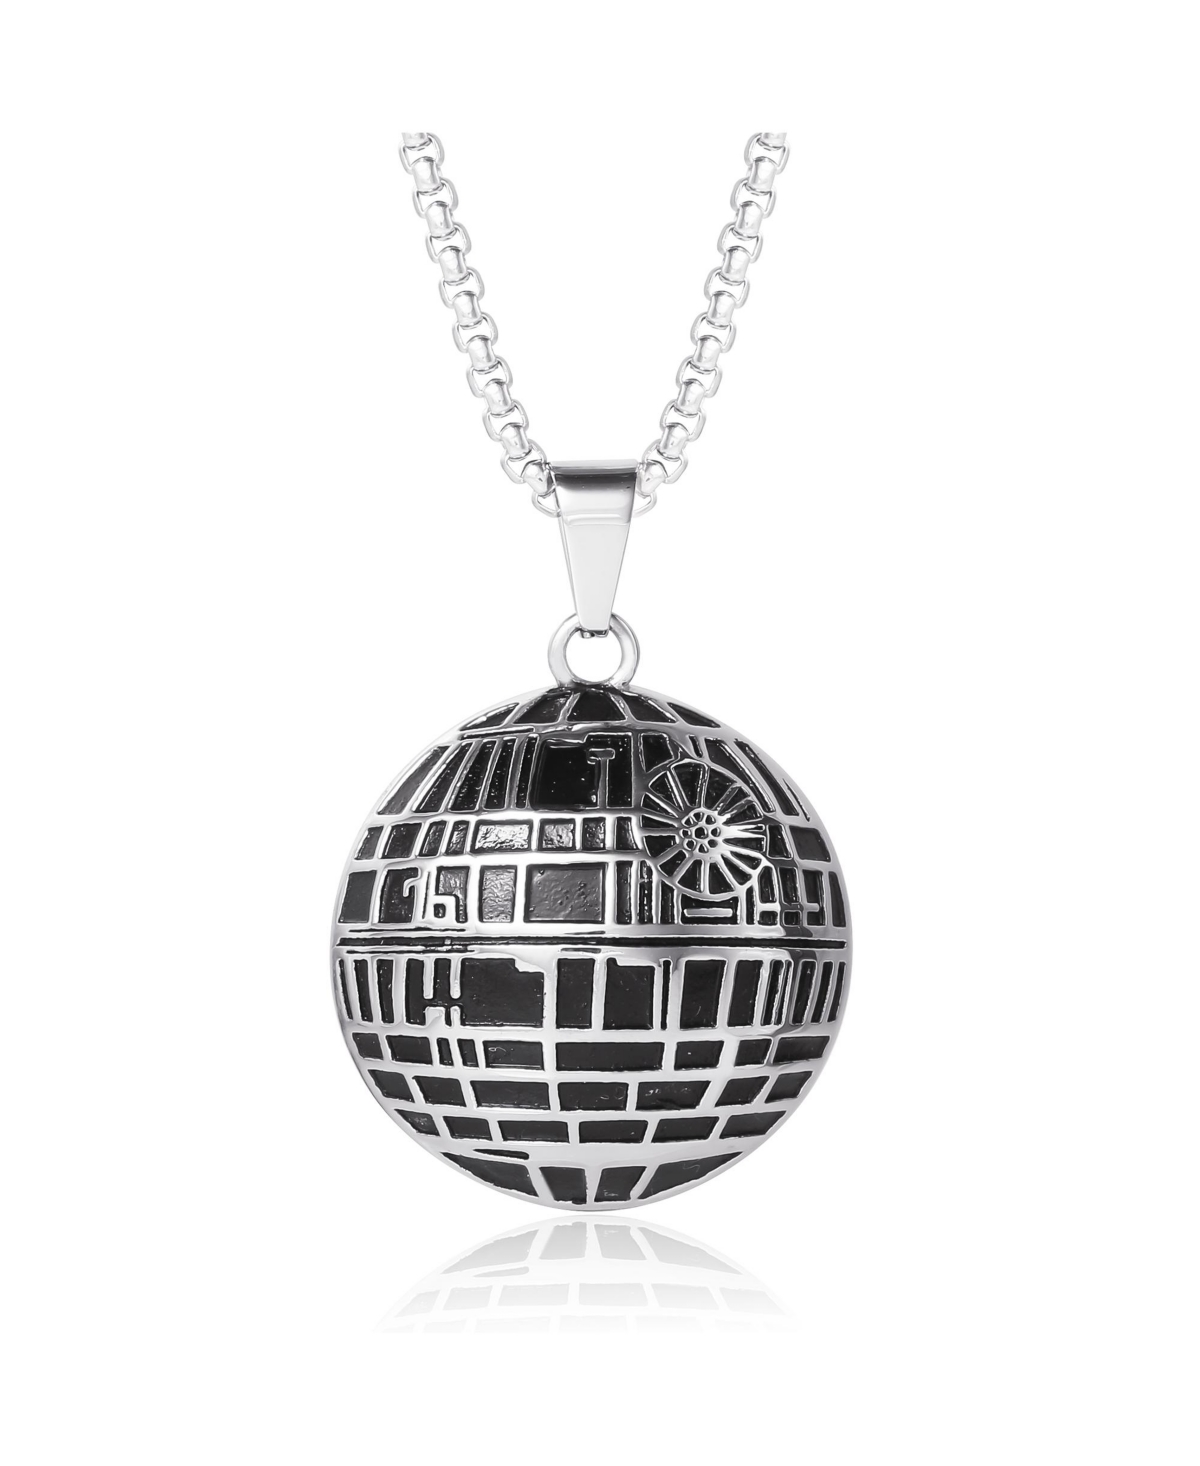 Men's Officially Licensed Death Star Stainless Steel Pendant Necklace, 22" Box Chain - Silver